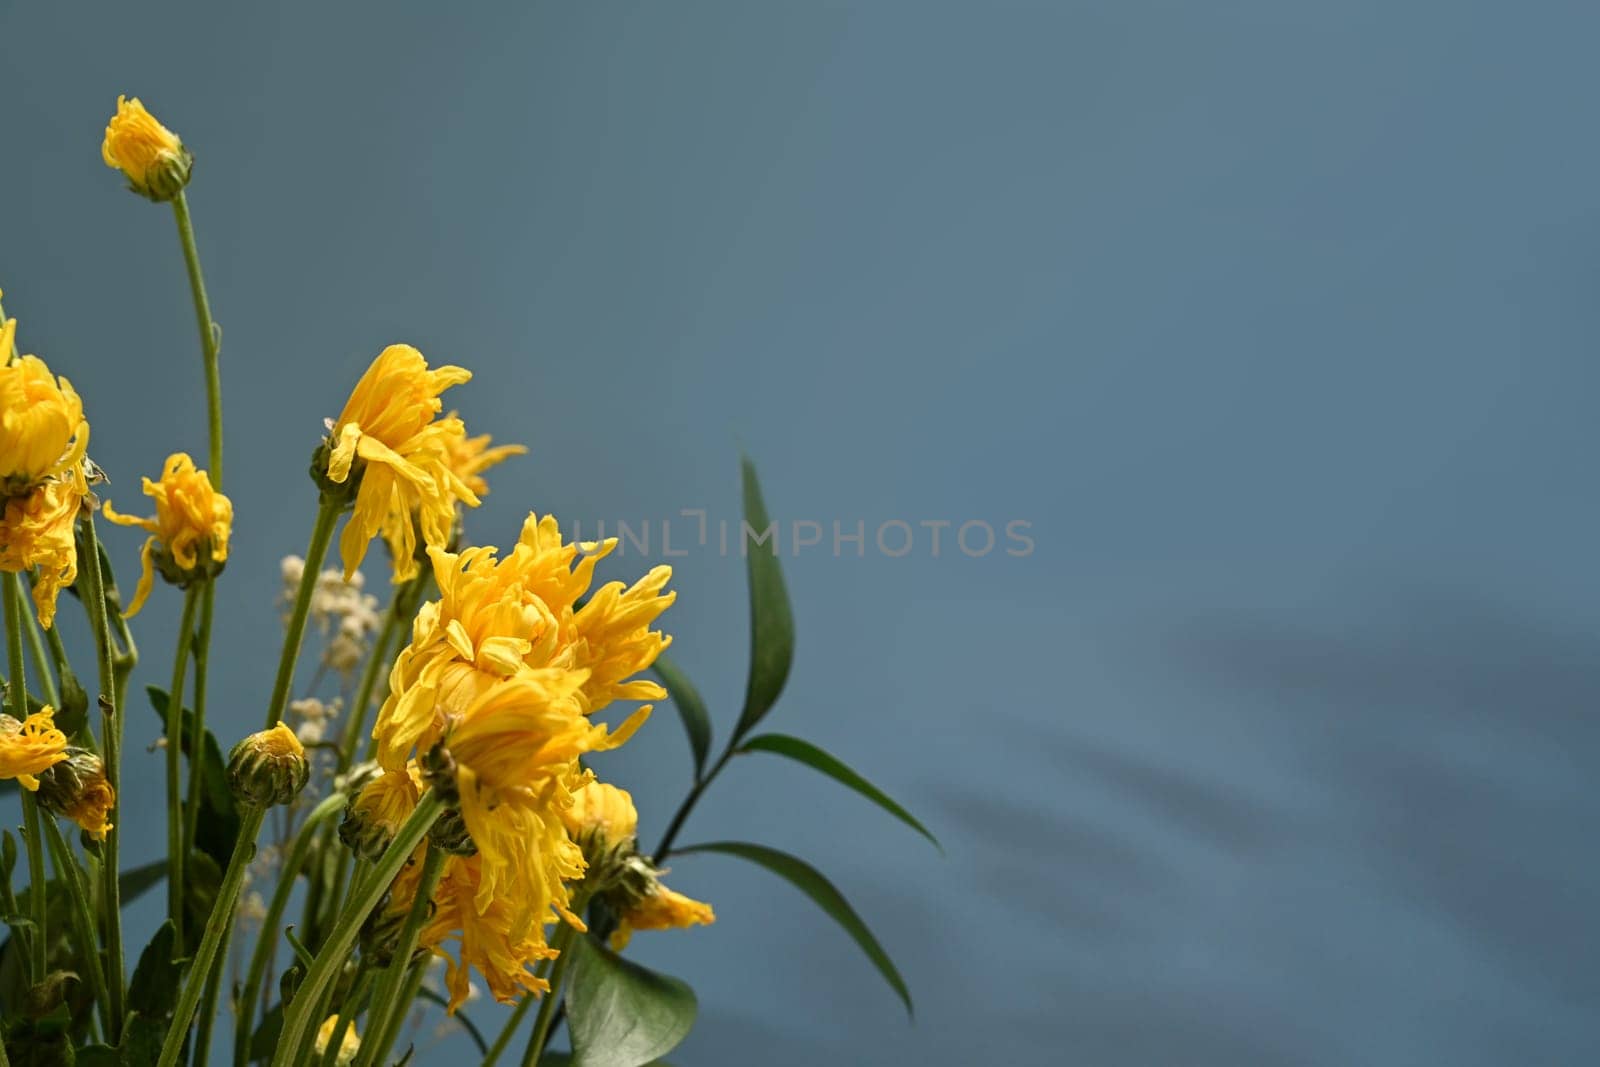 Wilted marigold flowers on blue background with copy space for your text.